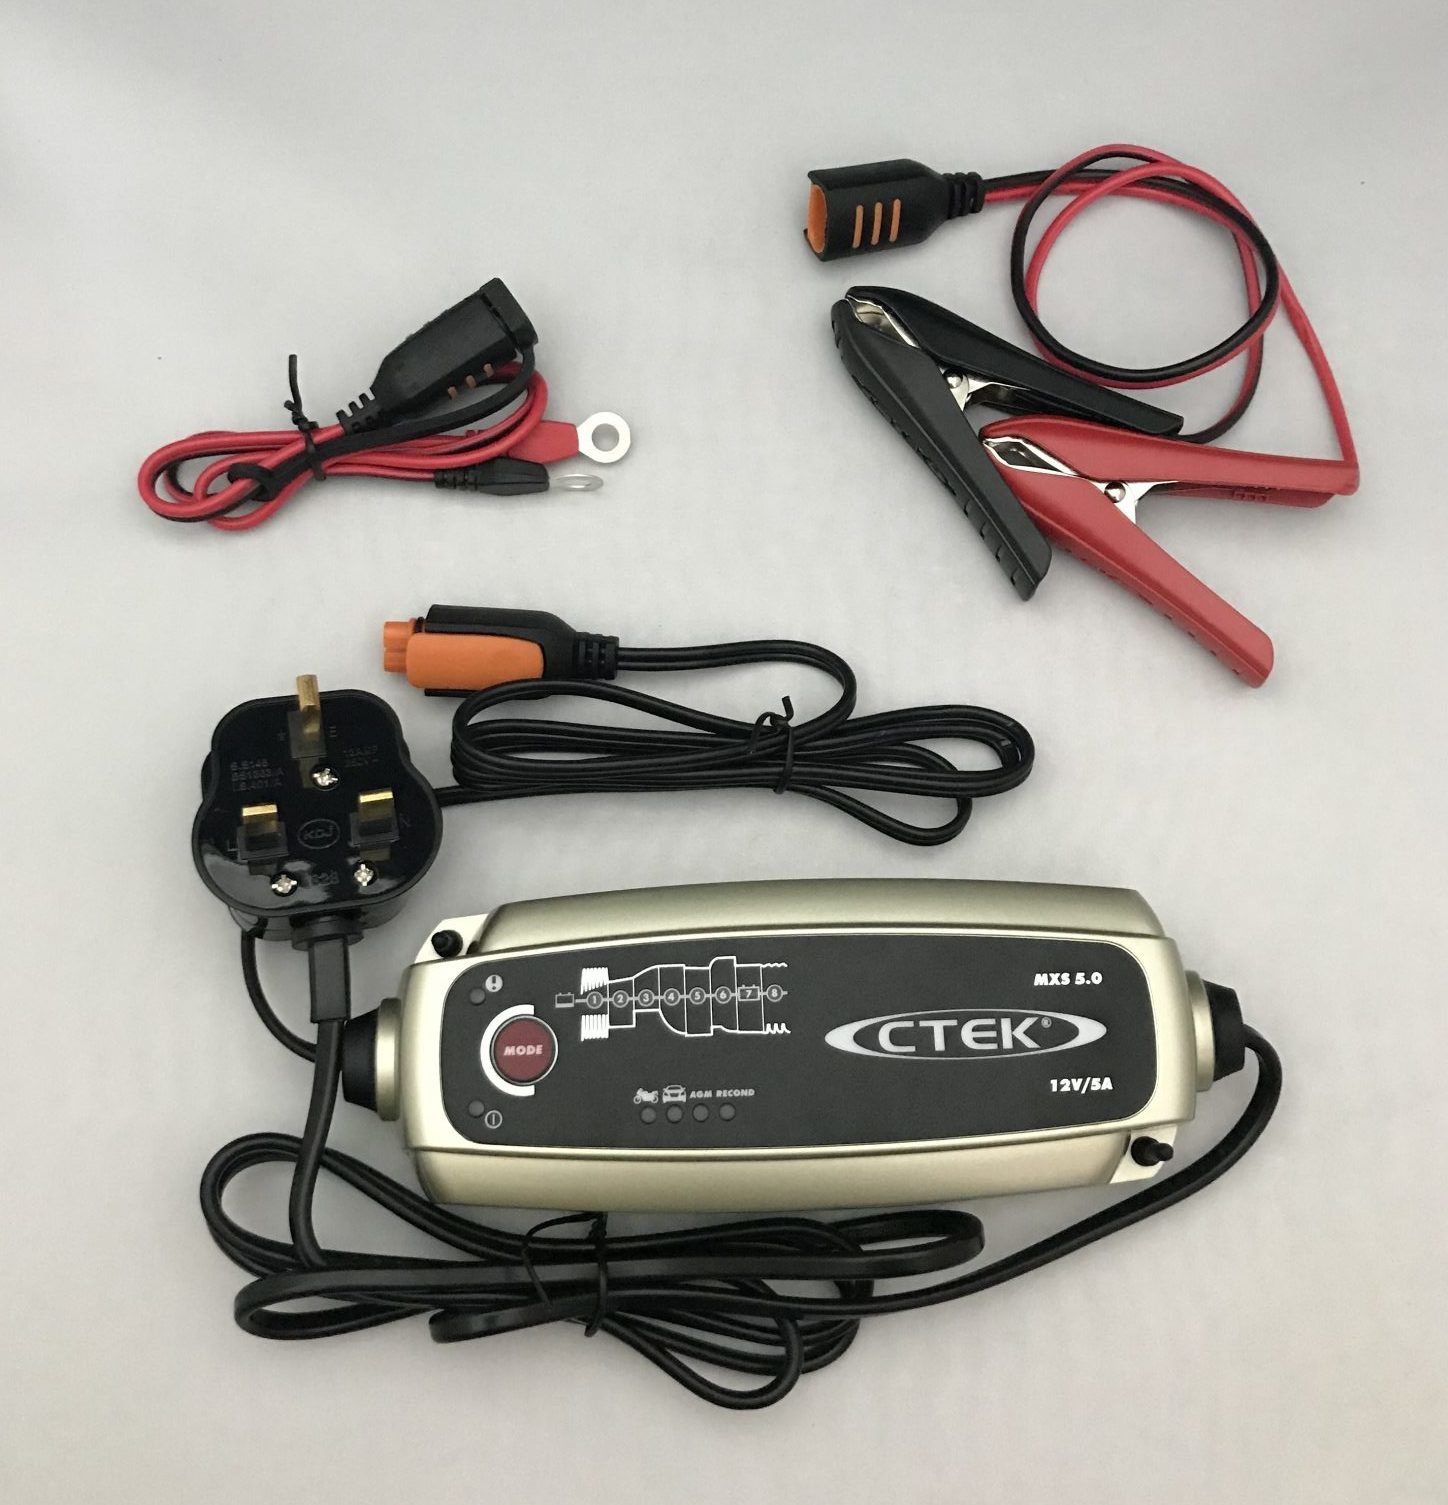 CTEK MXS 5.0 BATTERY CHARGER AND MAINTAINER - Porsche 968, 944, 924/928,  Cayman, Boxster, 991, 997, Accessories, 996, 993, 964, 911, 991 Turbo/GT3,  997 Turbo/GT3, 996 Turbo/GT3, Cayenne, Panamera, Macan charger, battery,  electrical - Parr